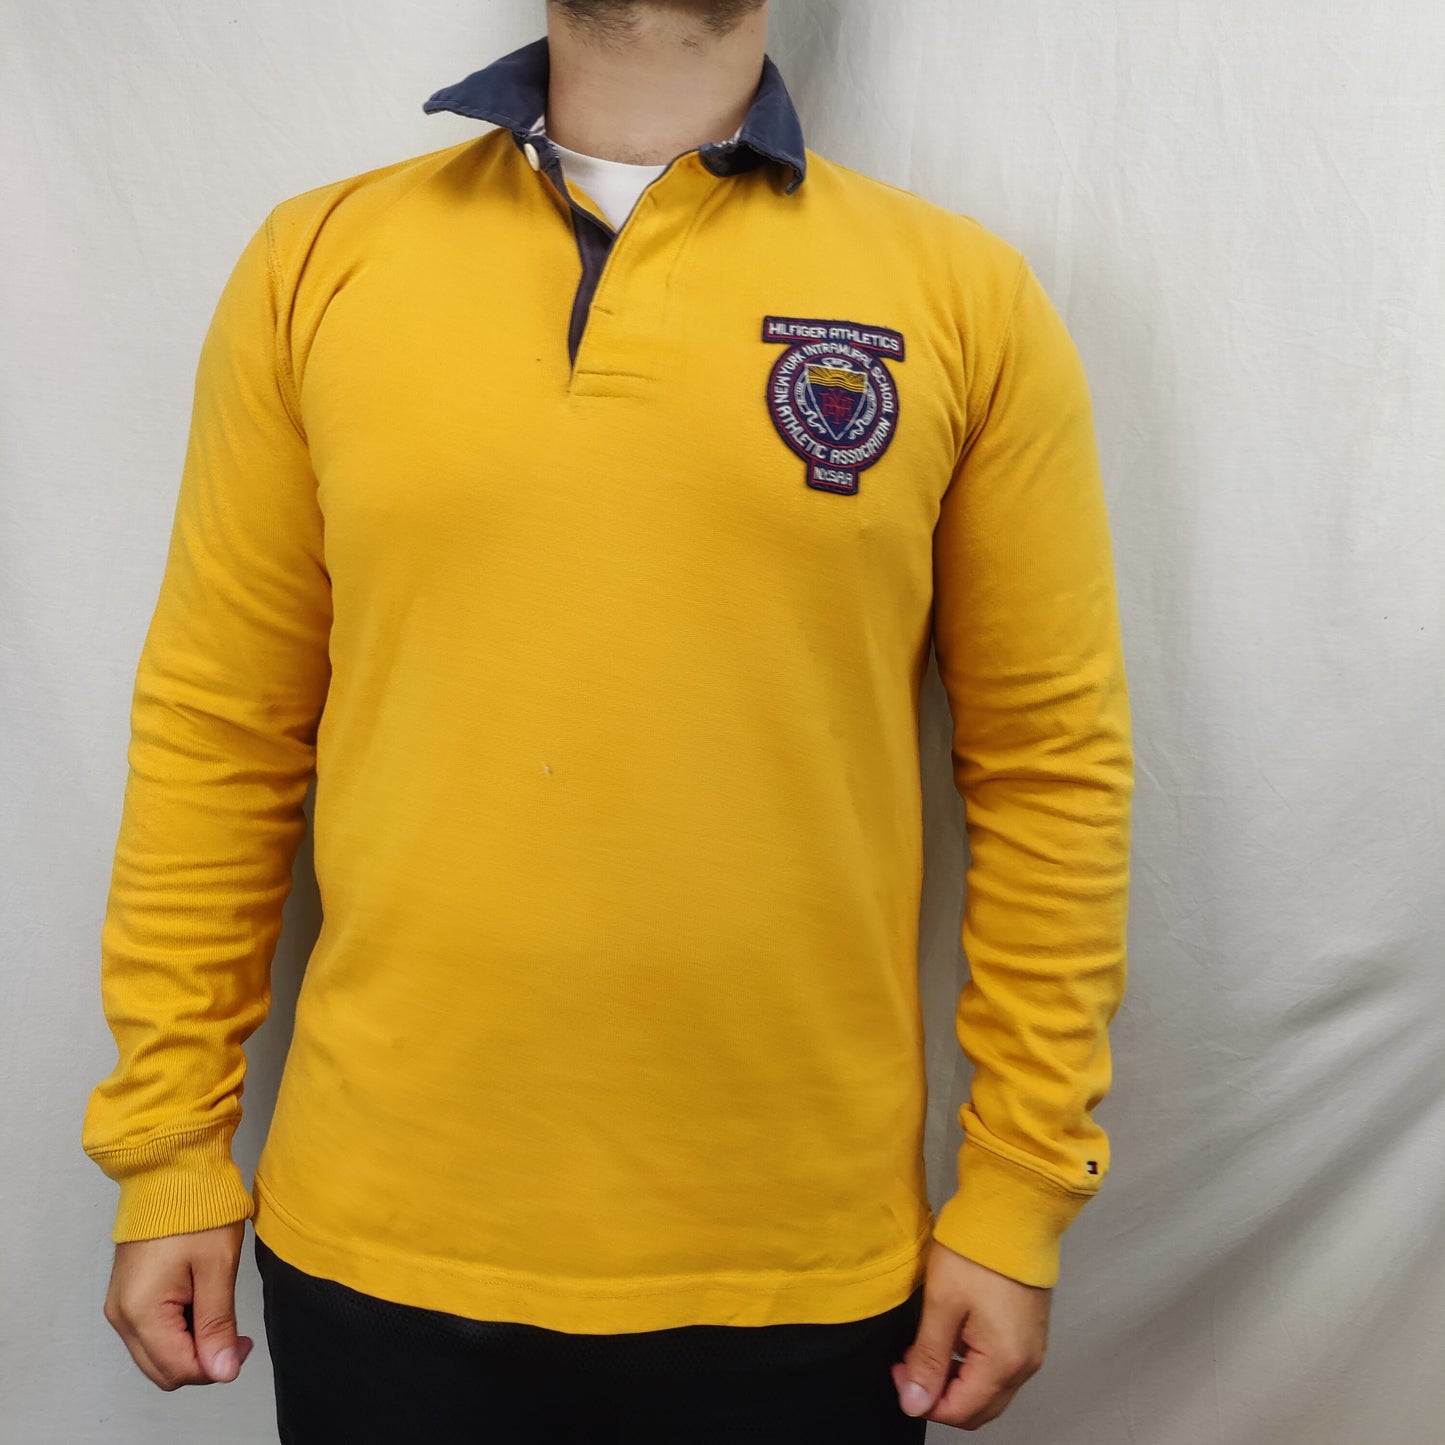 Tommy Hilfiger Vintage Yellow Long Sleeve Polo Shirt Men Size Large